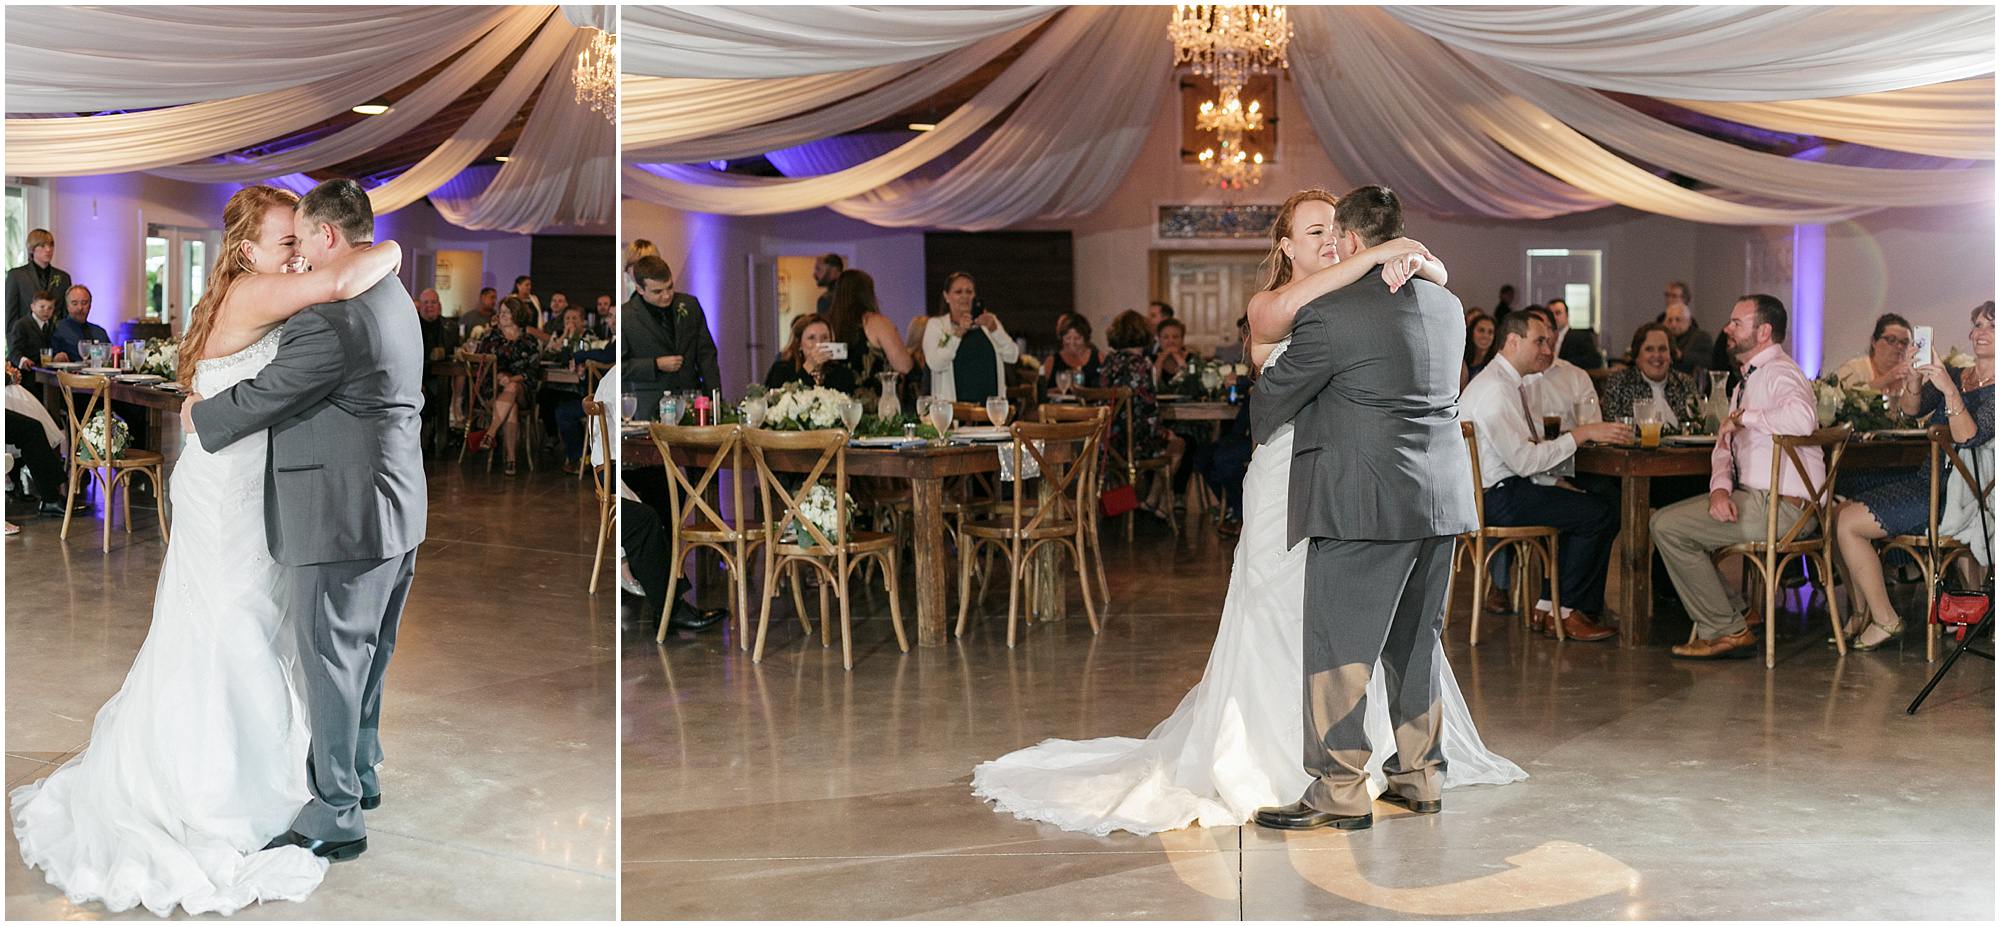 Bride and groom dancing in their first dance. 